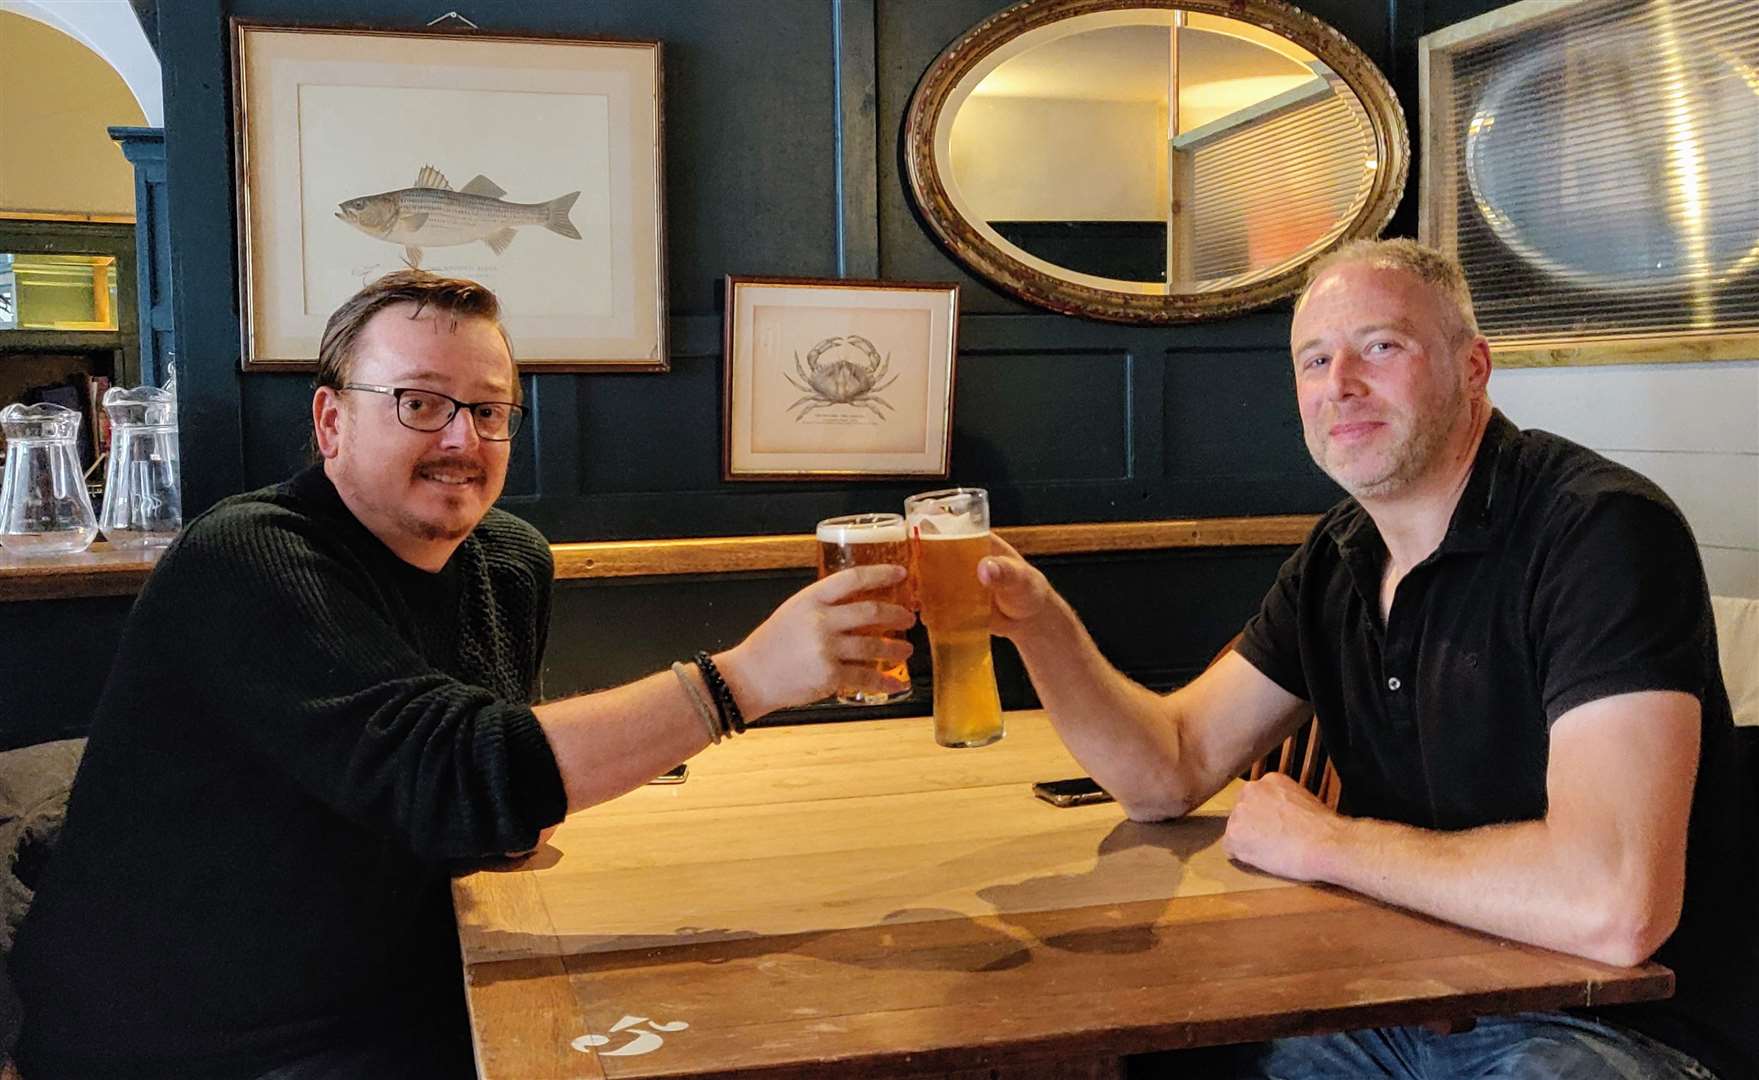 Friends Mike Hedges, left, and Matt Lane, raise a glass as pubs across the country emerged from lockdown